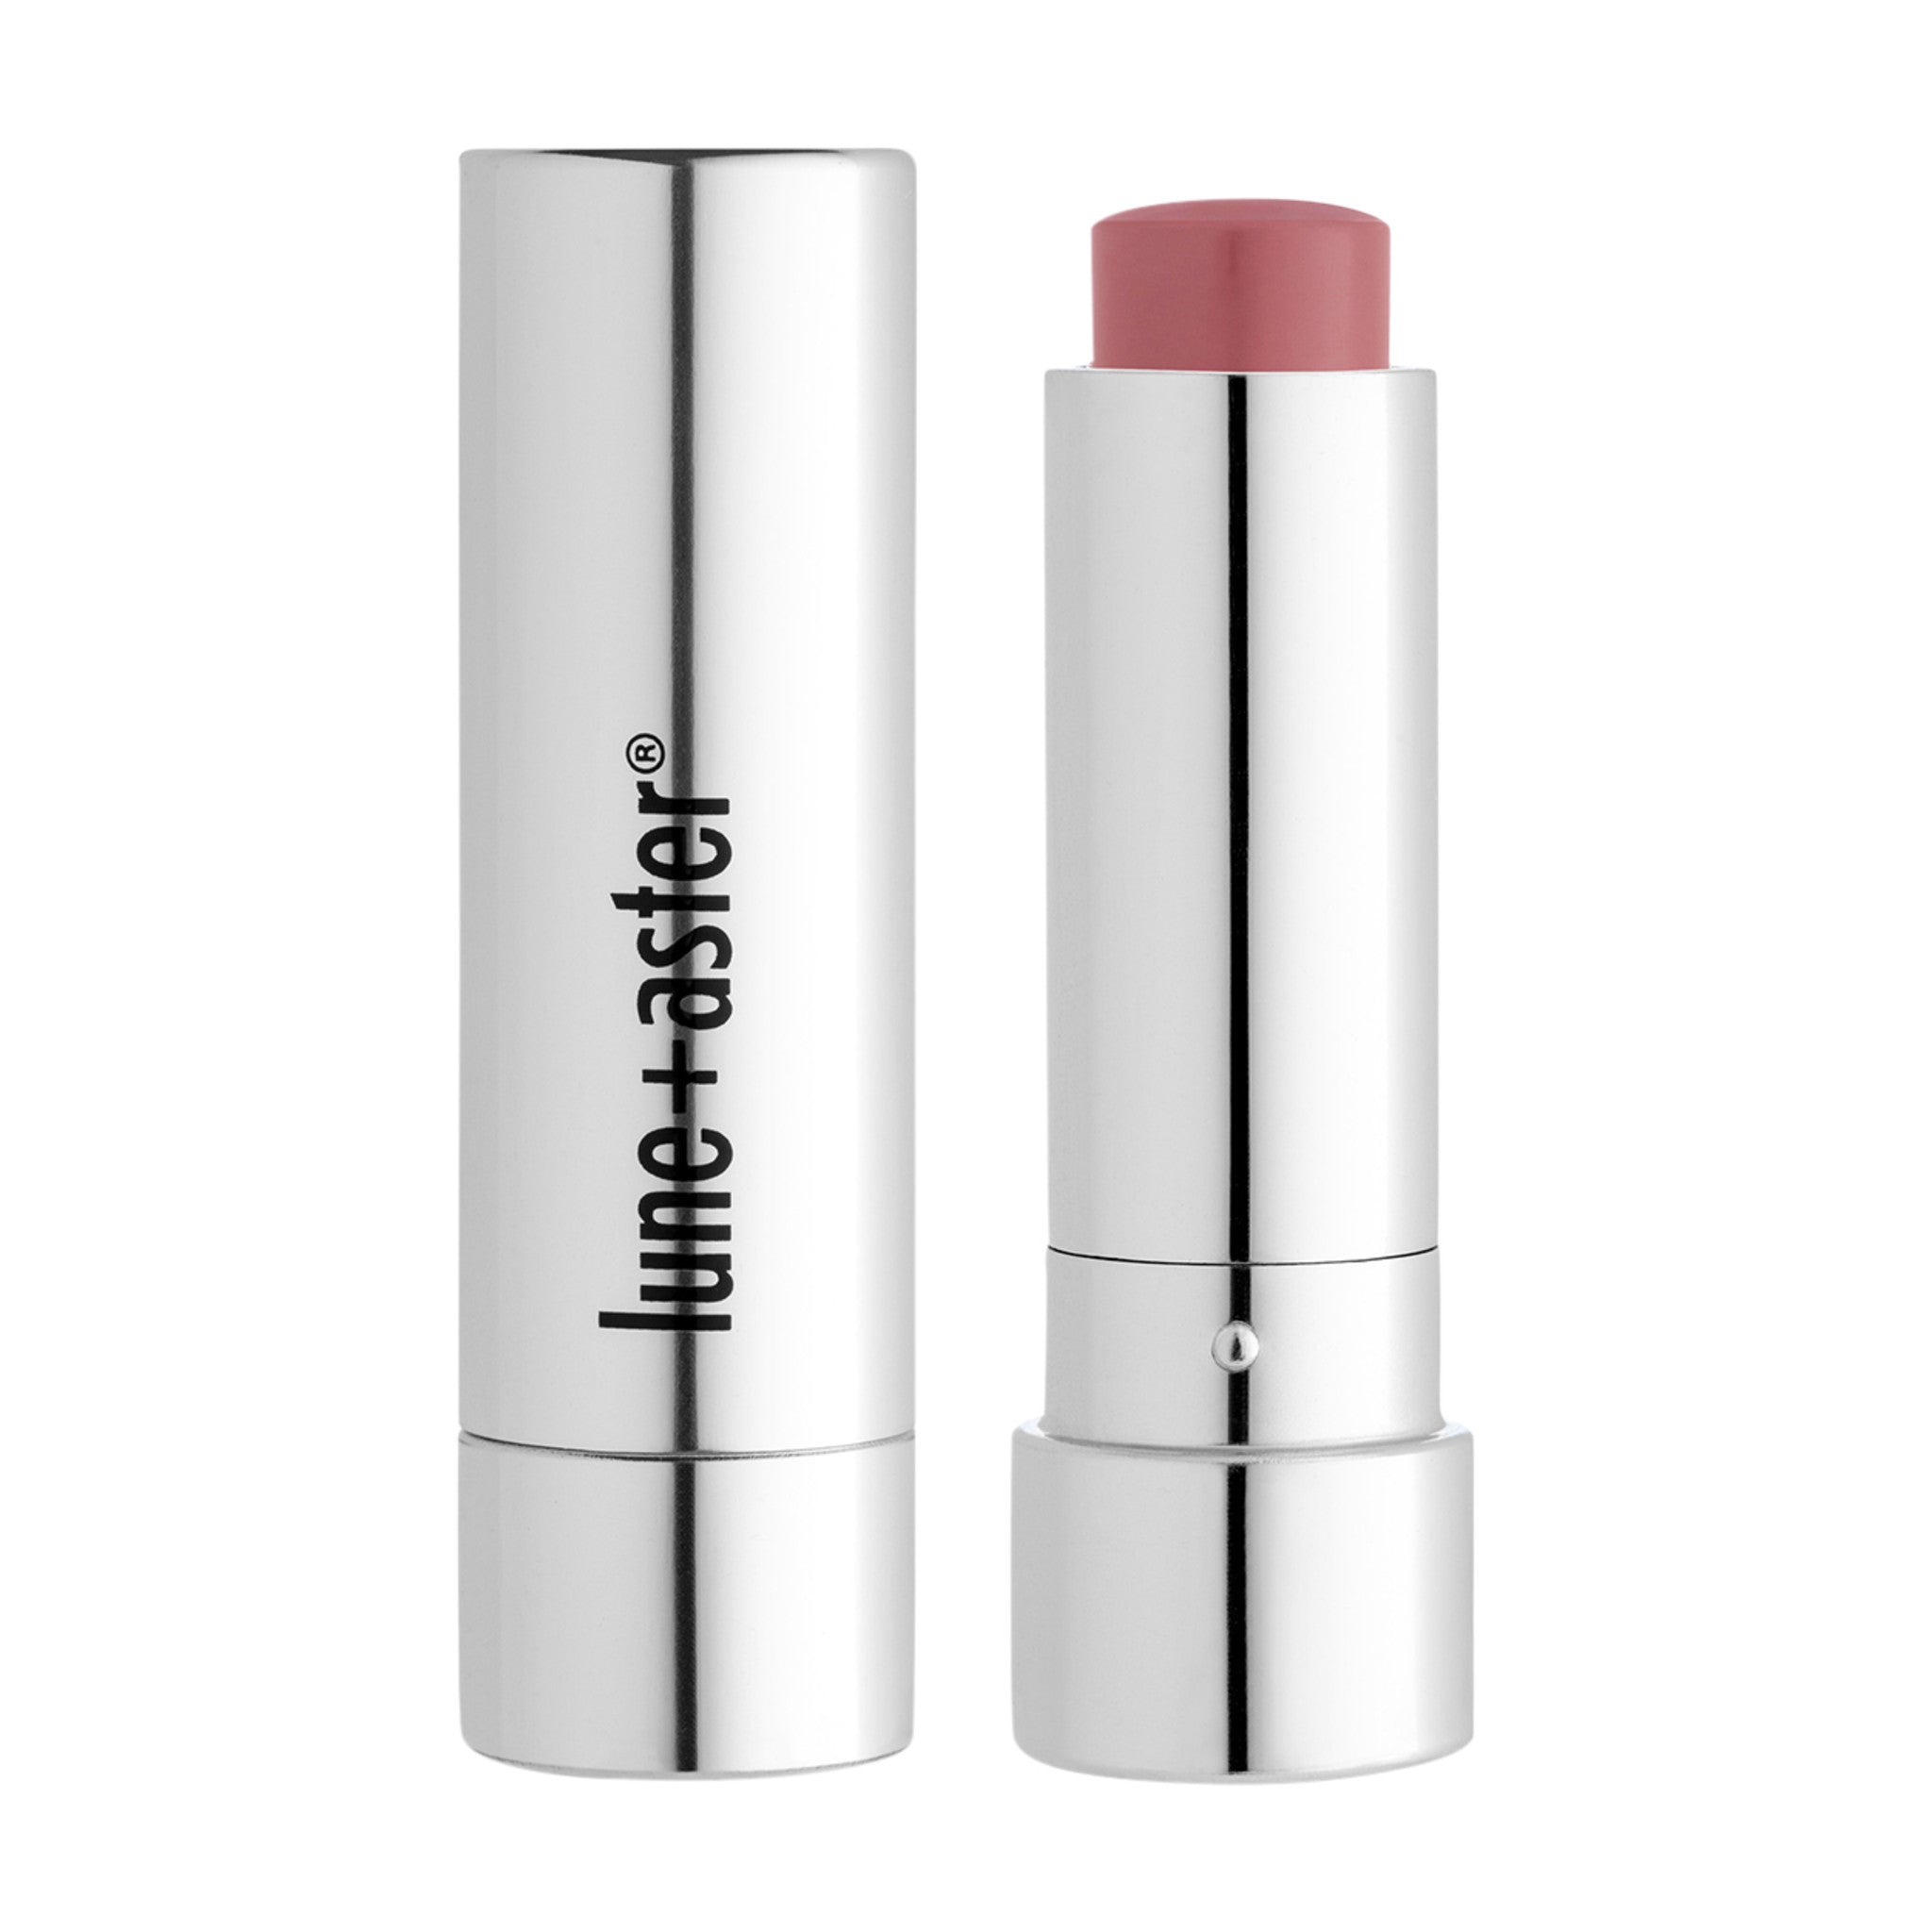 Lune+Aster Tinted Lip Balm Color/Shade variant: Dare To Dream main image. This product is in the color pink